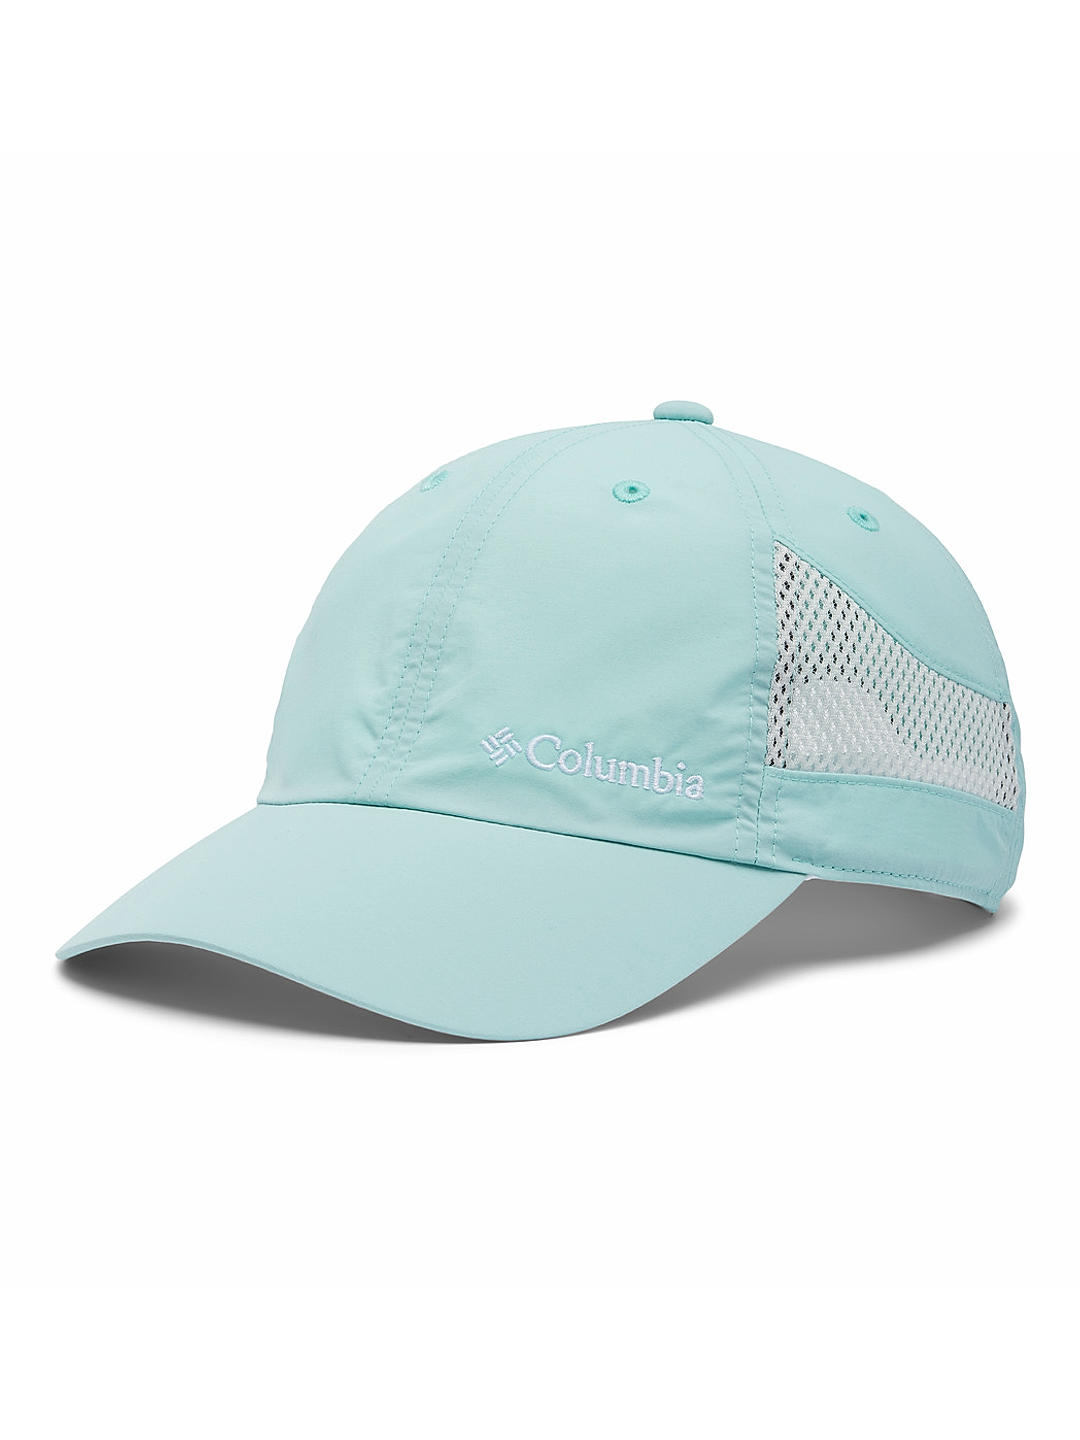 Buy Green Tech Shade Hat for Men and Women Online at Columbia